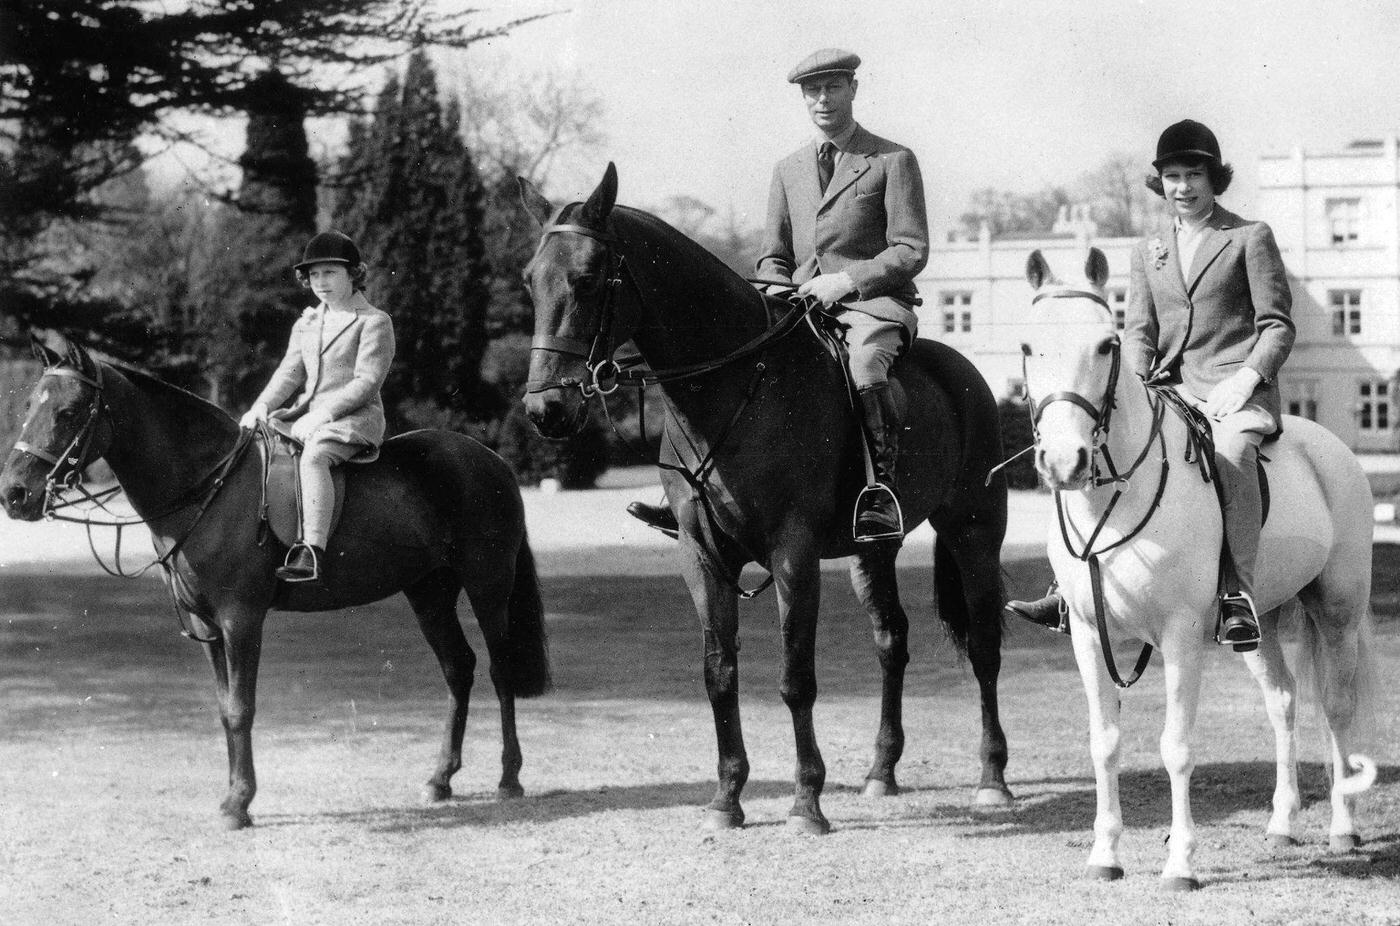 King George VI out riding his horse with his daughters Princess Elizabeth, later Queen Elizabeth II, and Princess Margaret (left) in Windsor Great Park, England, 21st April, 1939.